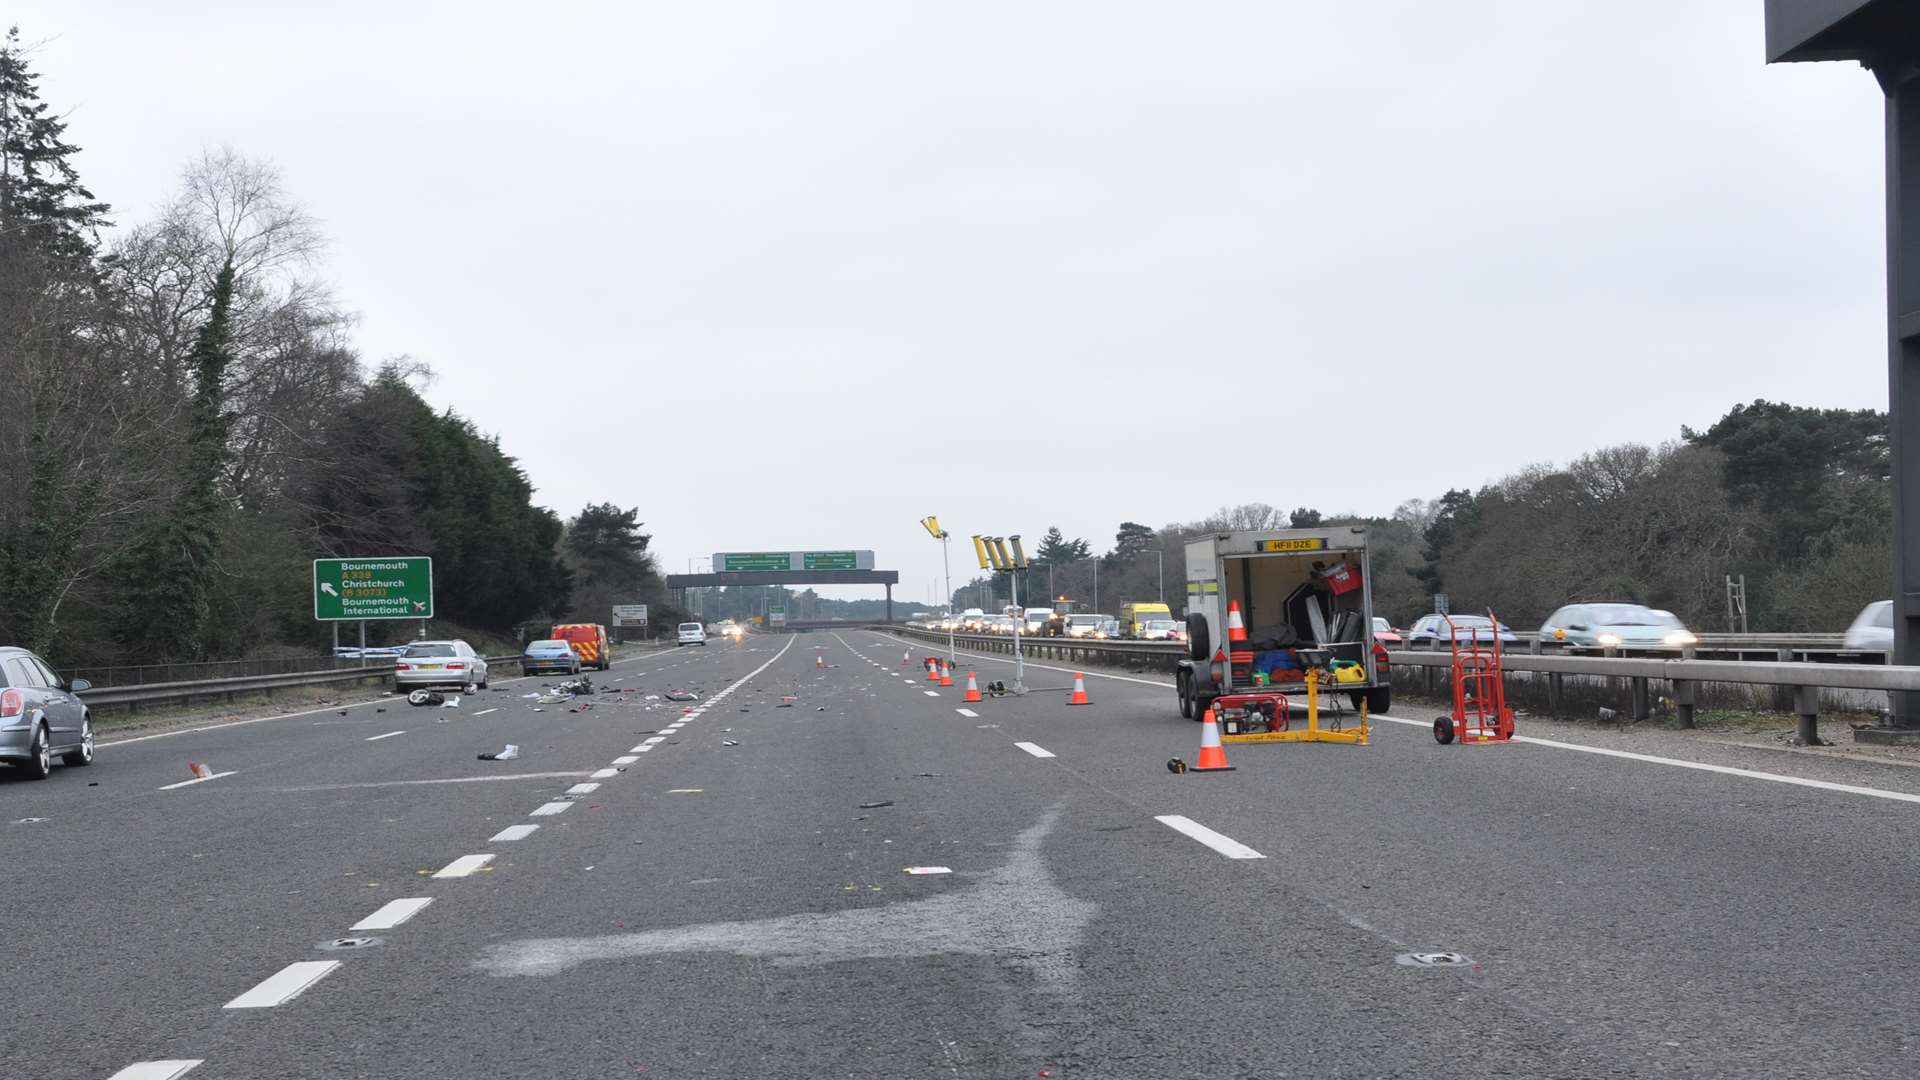 The scene of the crash on the westbound carriageway of the A31 in Dorset. Credit: Dorset Police